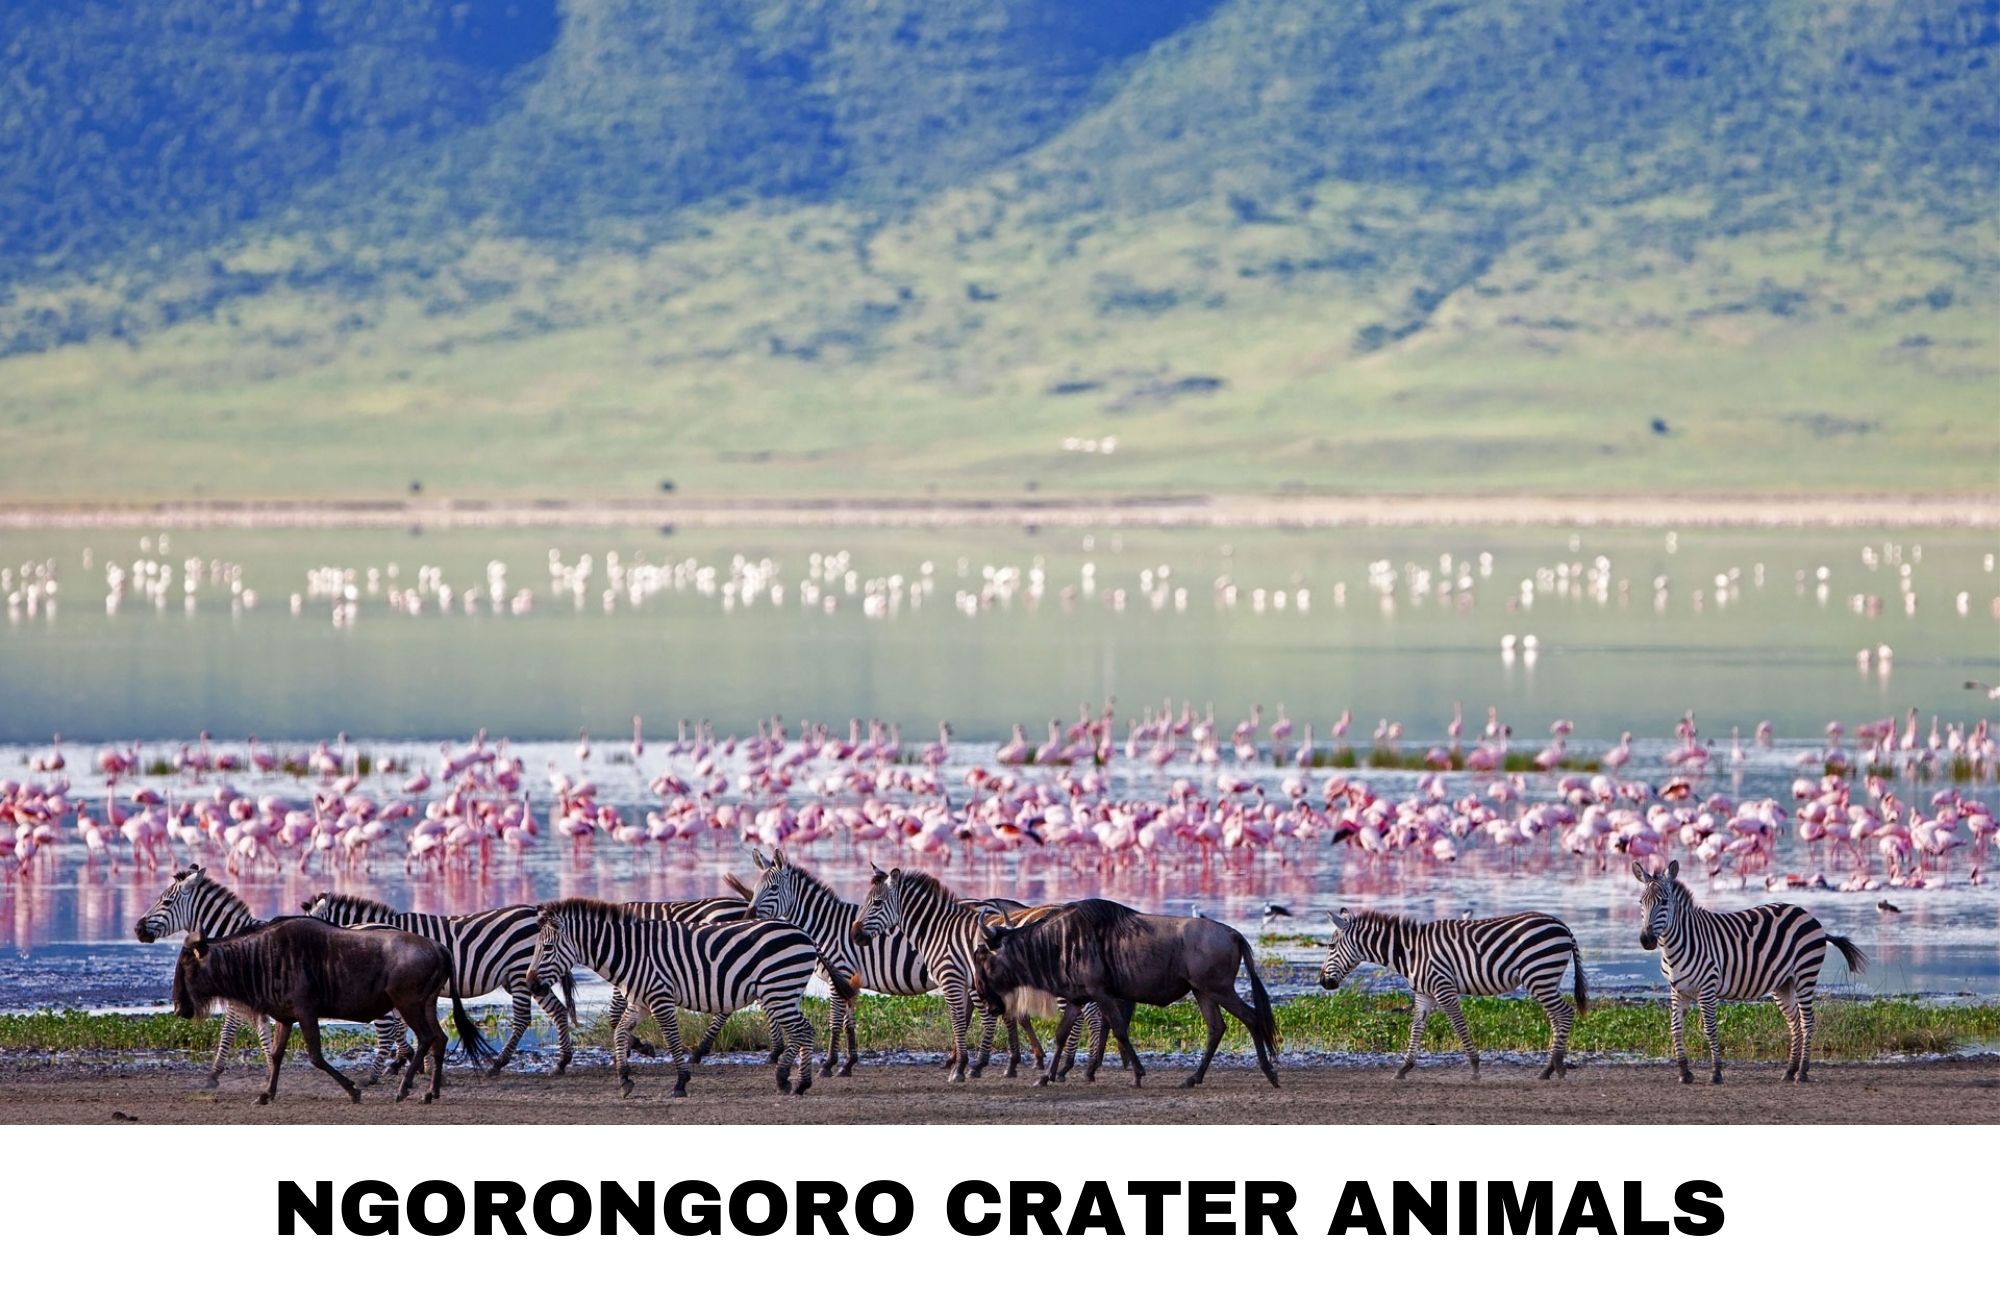 The animals of the Ngorongoro Crater, including wildebeest, zebras, and different types of birds on a top of the water